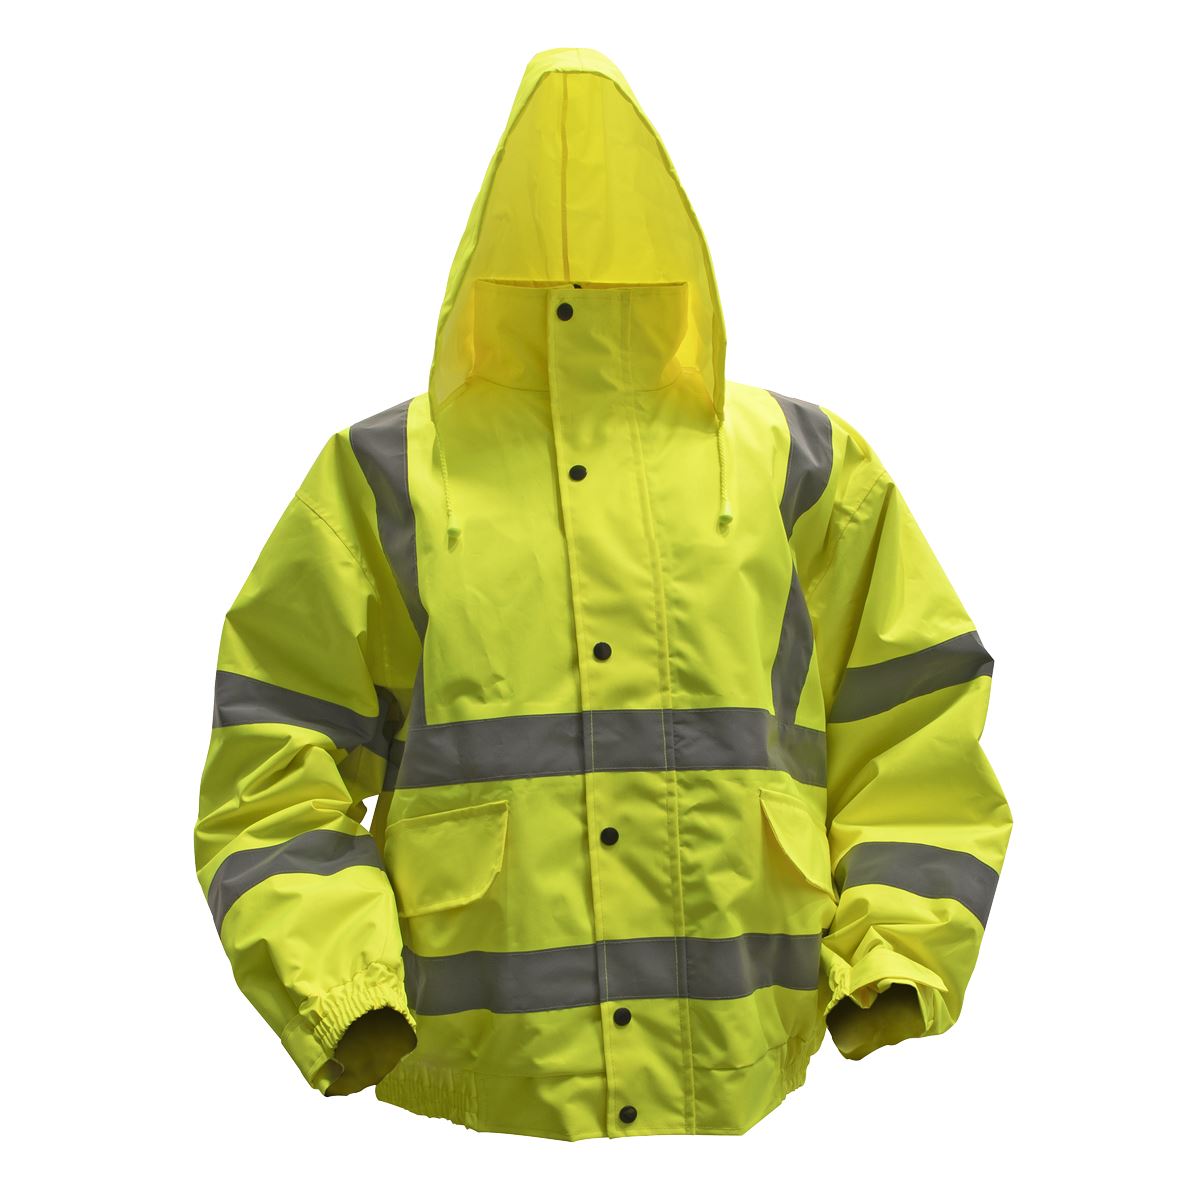 Worksafe by Sealey Hi-Vis Yellow Jacket with Quilted Lining & Elasticated Waist - Large